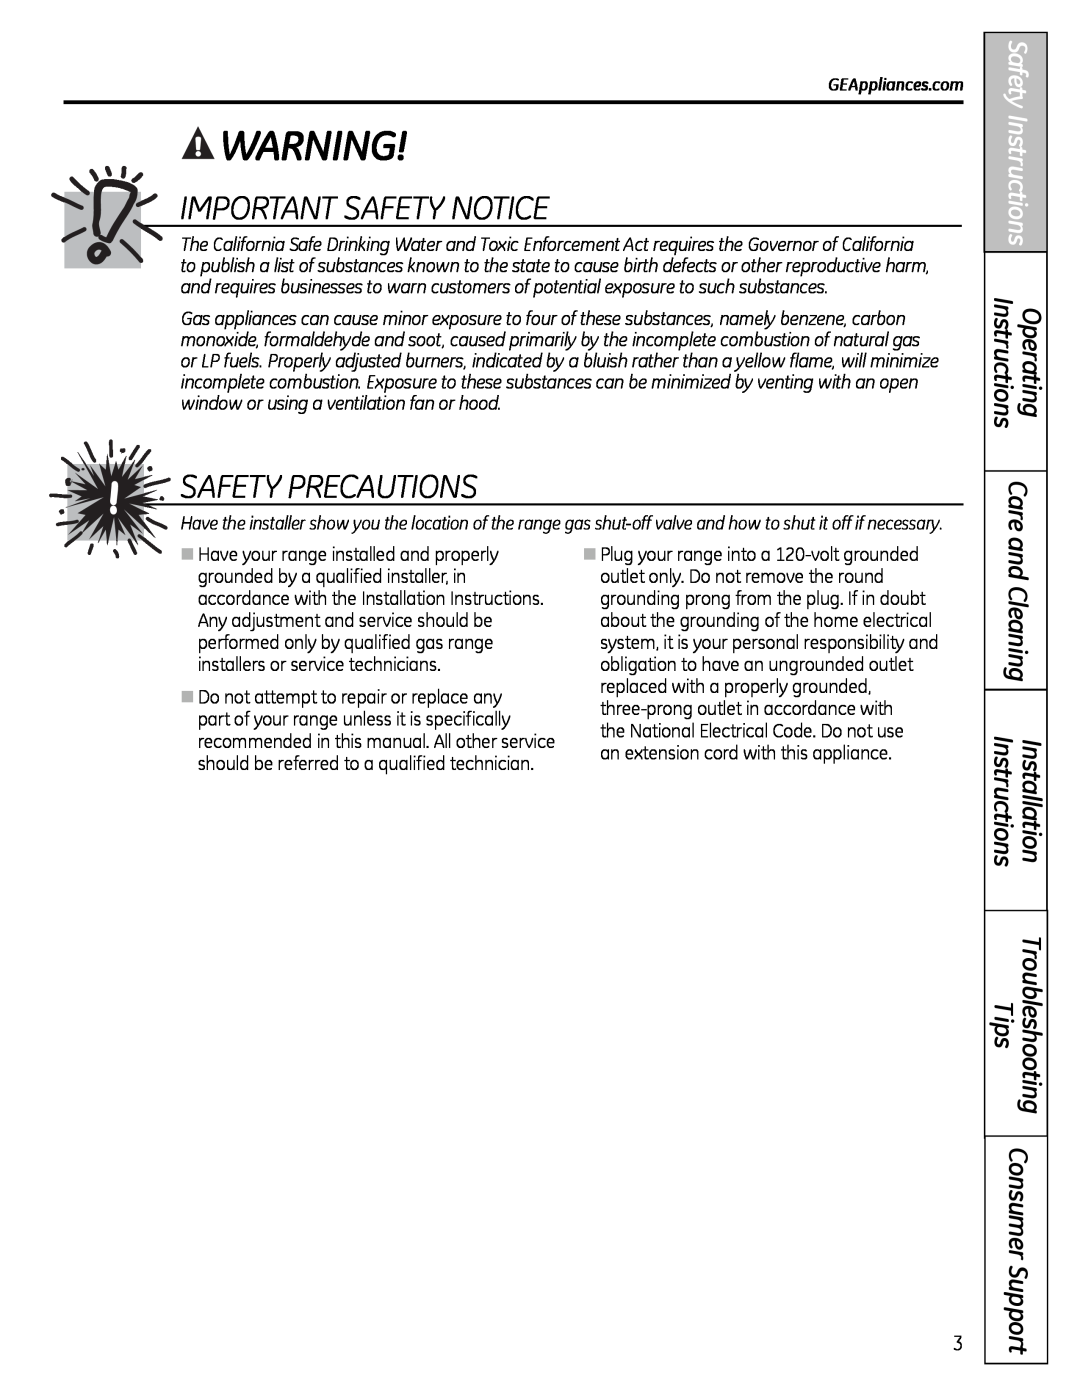 GE JGB281, JGB3000 IMPORTaNT SaFeTY NOTICe, SaFeTY PReCaUTIONS, and Cleaning Installation Troubleshooting InstructionsTips 